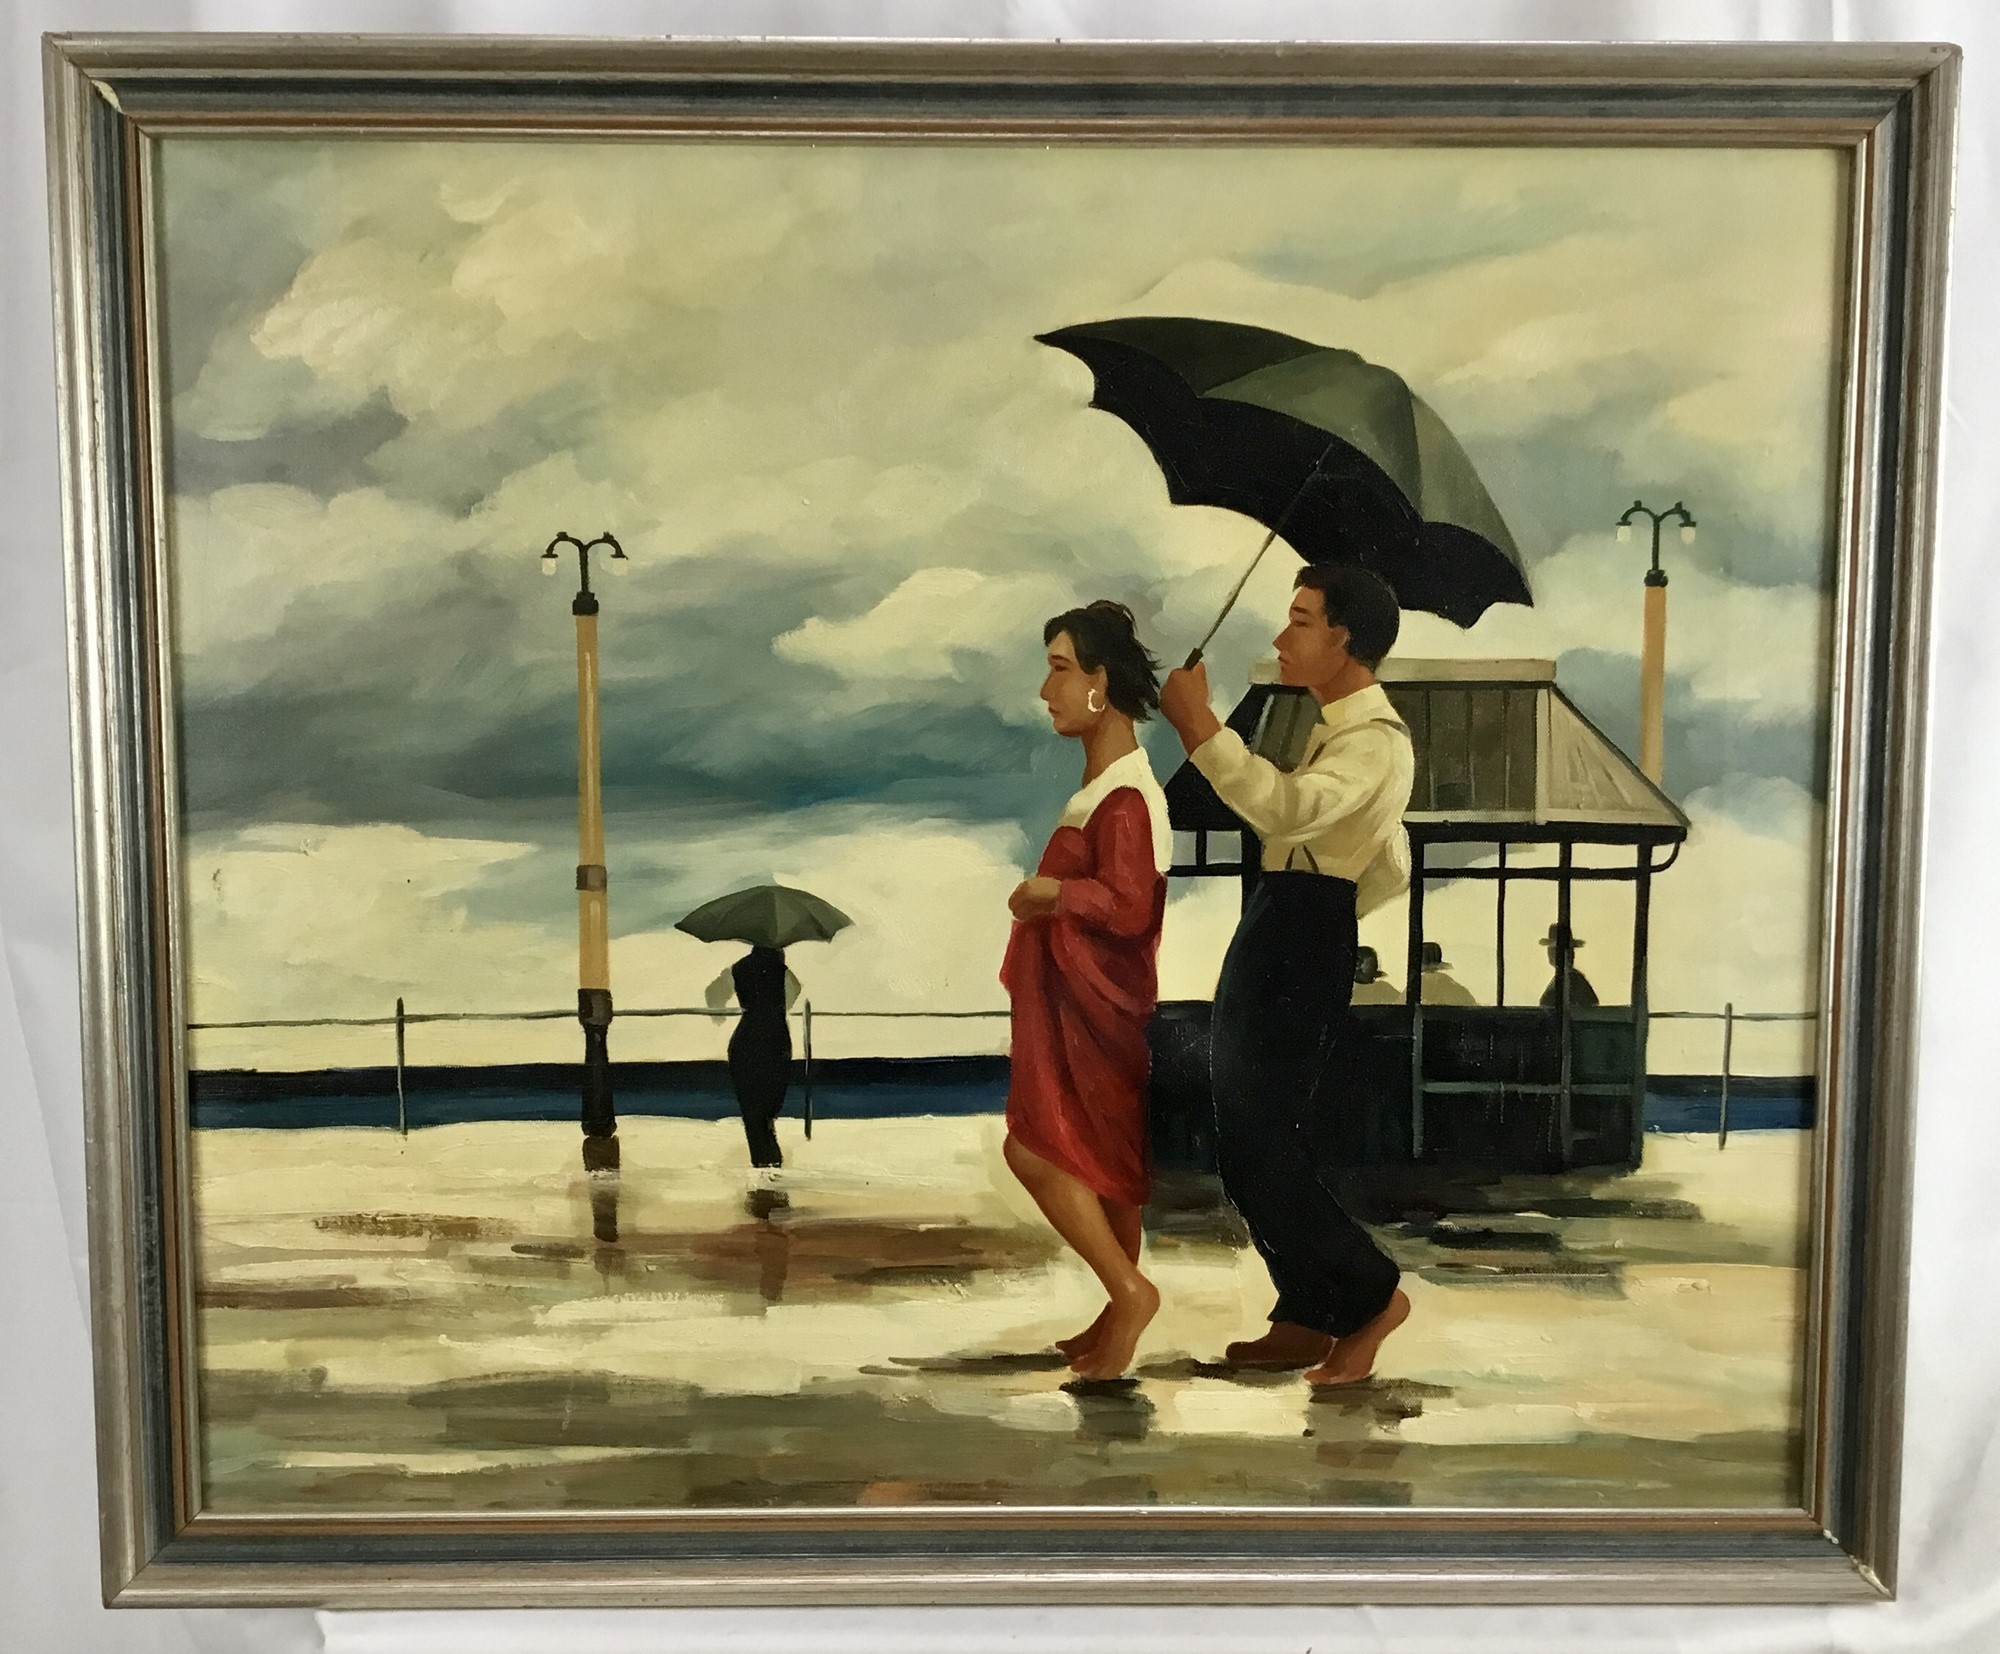 figures with umbrellas on a rainy day by Jack Vettriano